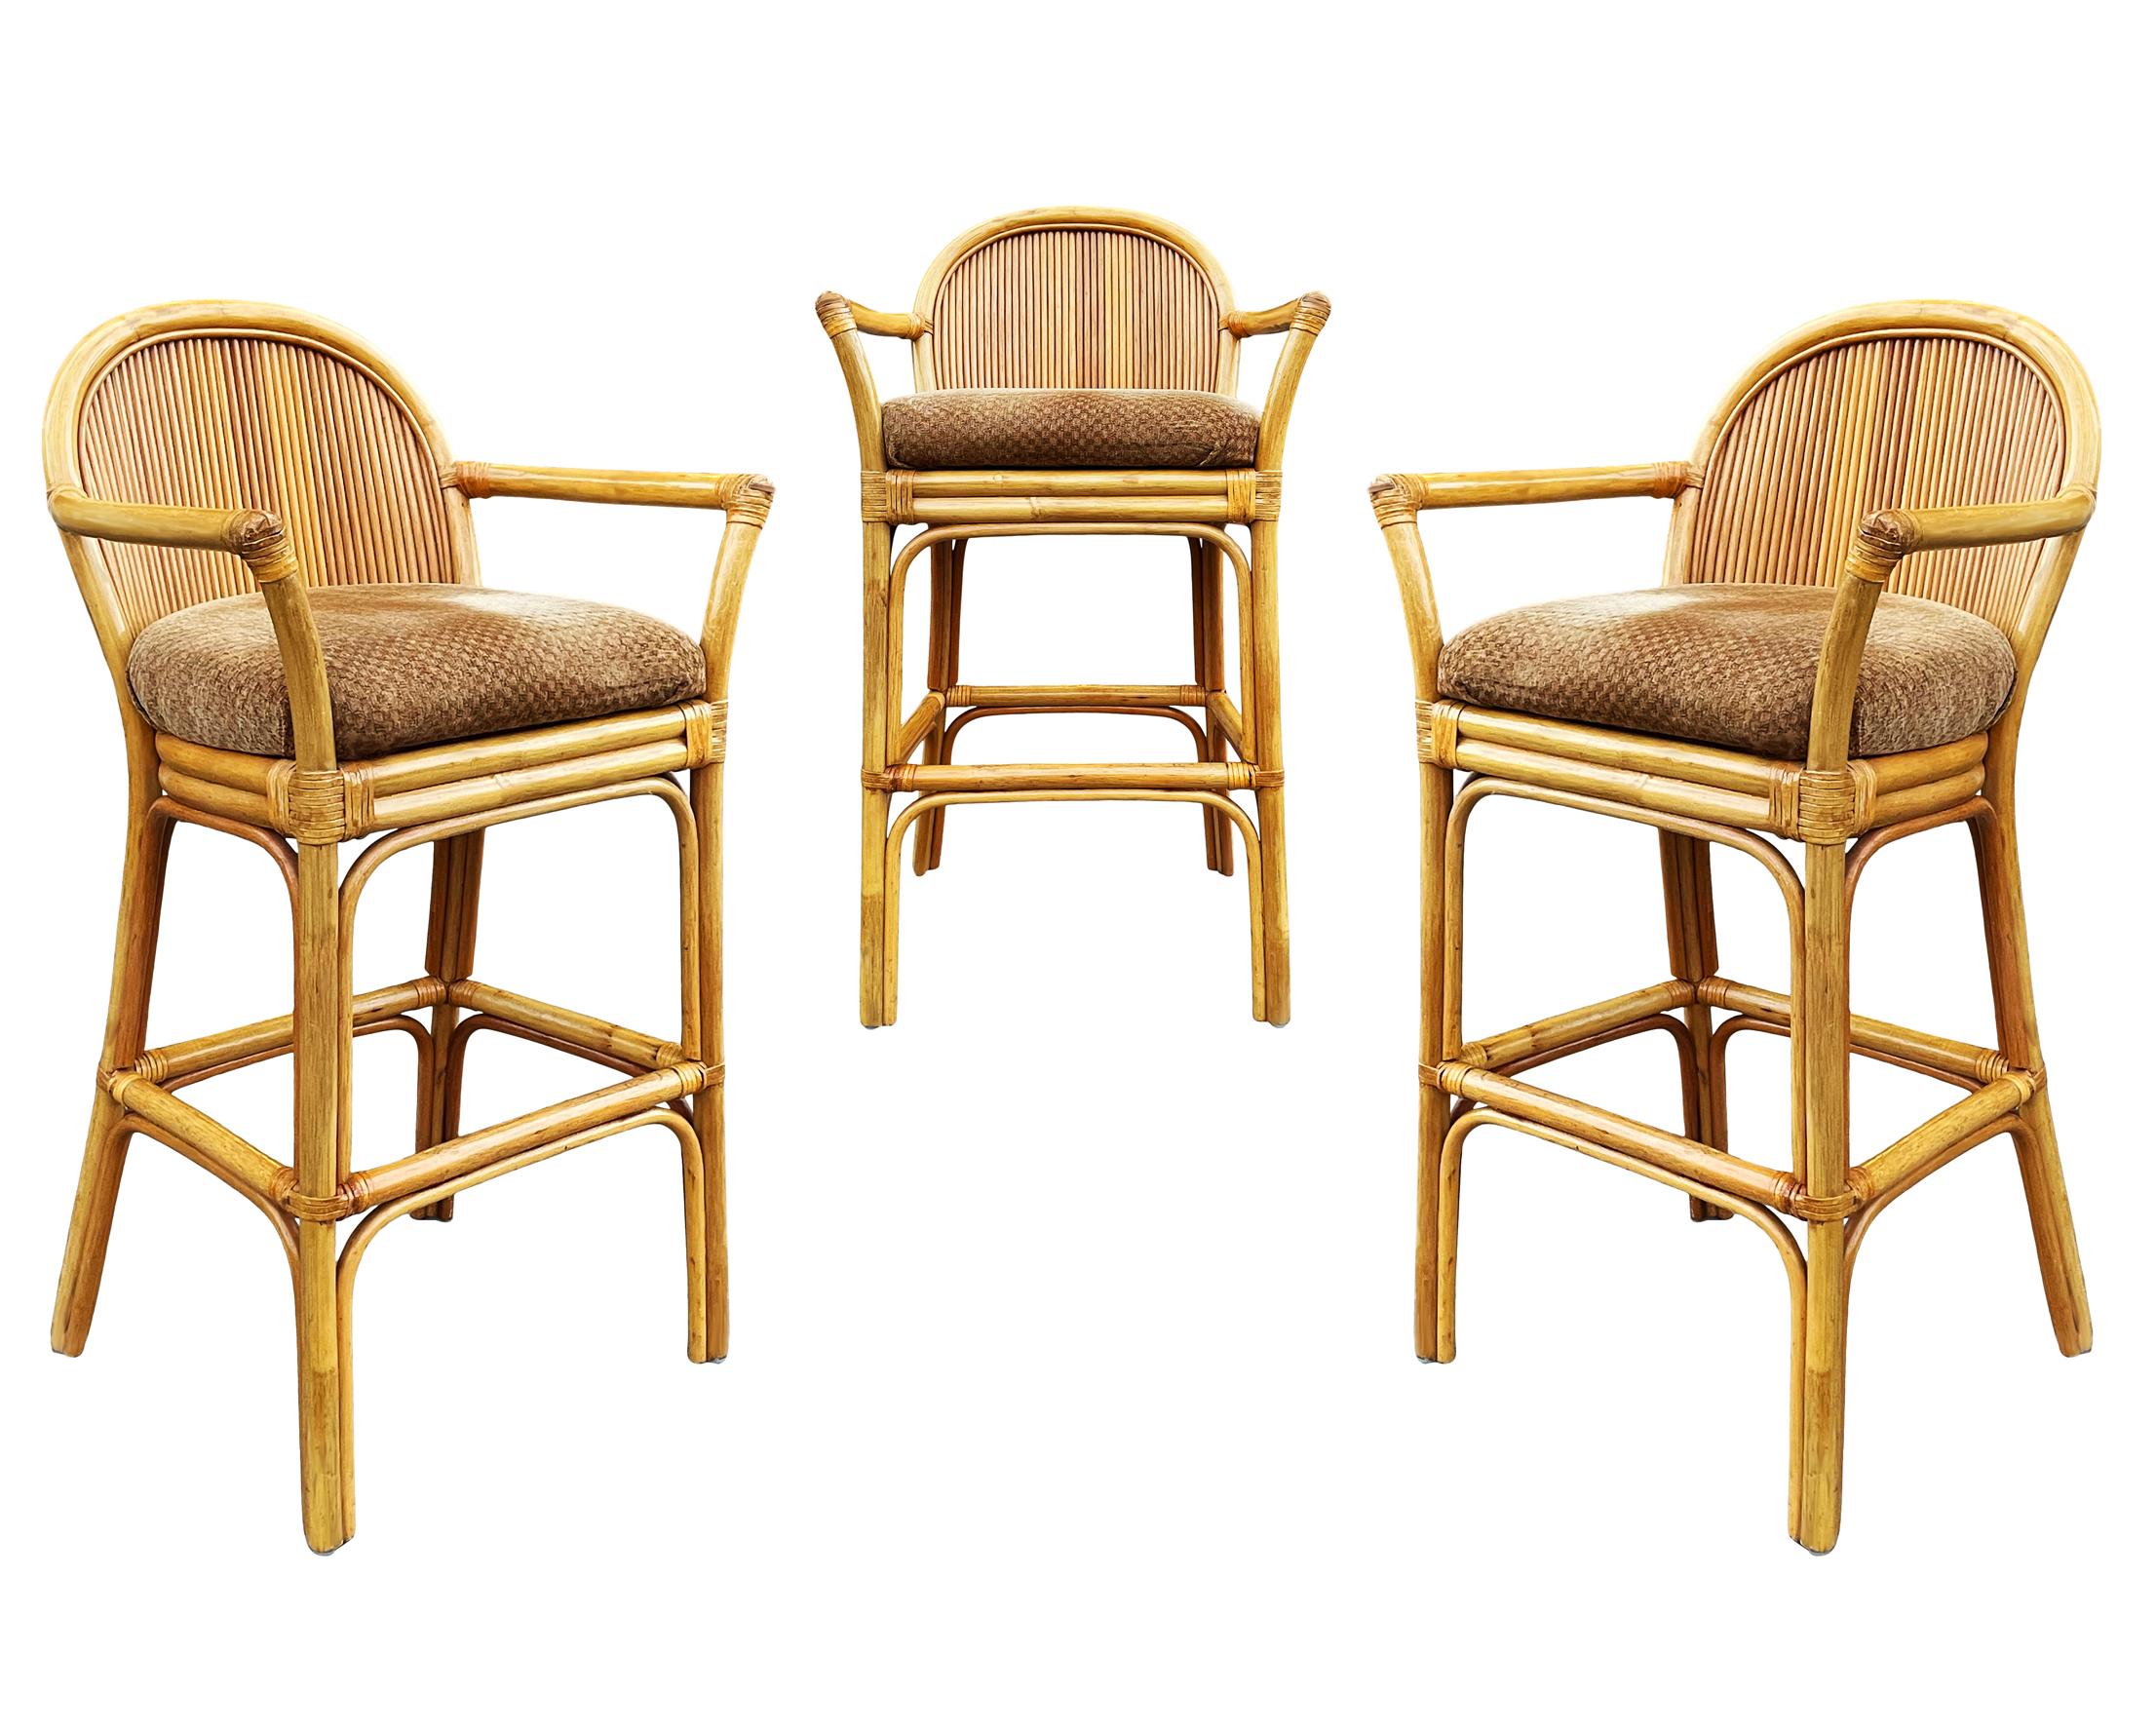 Set of 3 Matching Mid-Century Modern Rattan or Bamboo Bar Stools In Good Condition For Sale In Philadelphia, PA